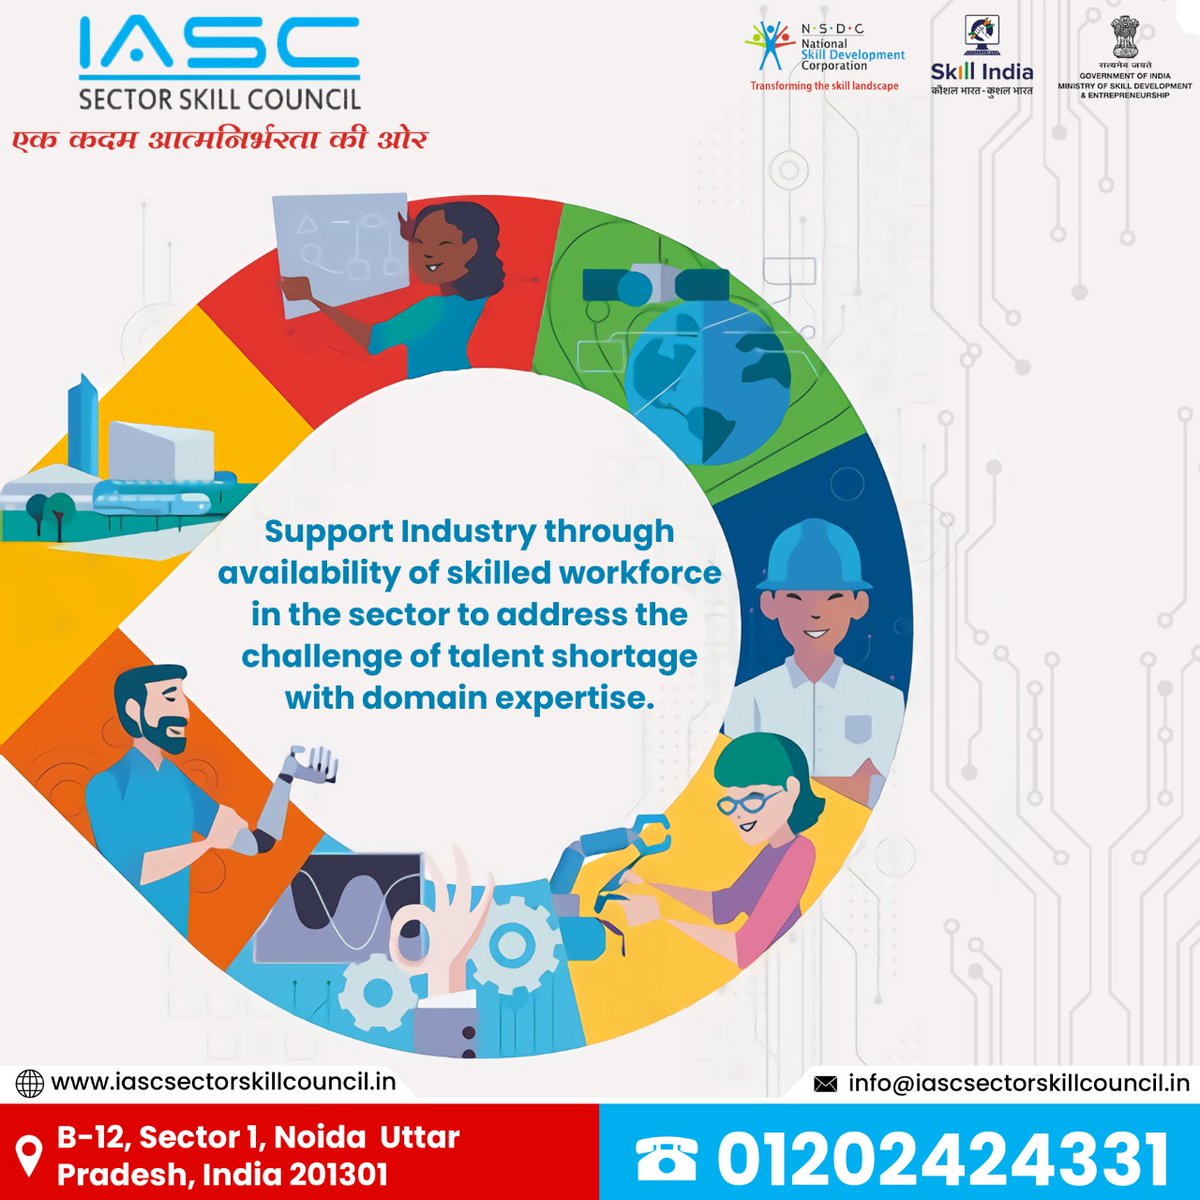 We provides training and certification programs to help workers acquire the skills required to meet industry standards. 
@dpradhanbjp
@Rajeev_Gol
@SkillCouncil
@PMKVY
@MSDESkillIndia
@NSDCINDIA
@NITIAayog
@NCVETIndia
#PMOIndia
#SkillIndia
#Skill4All